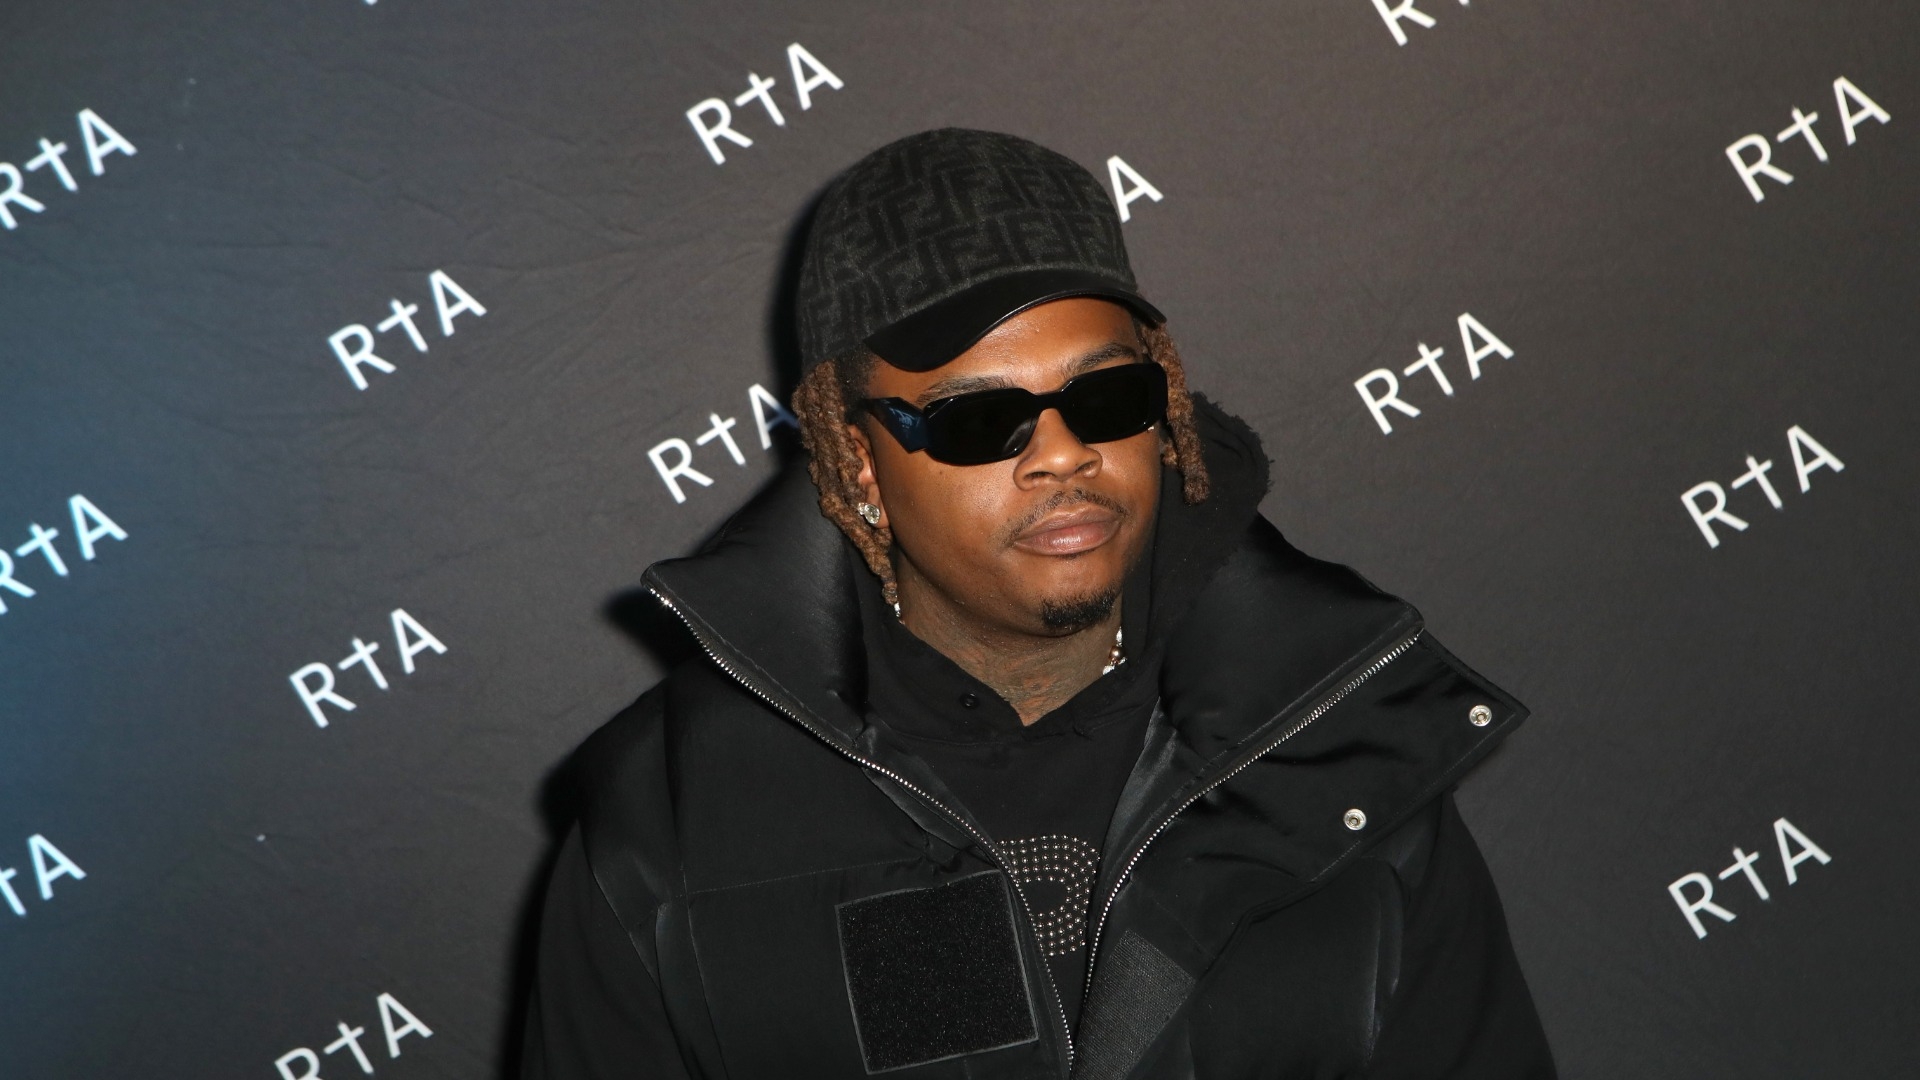 Gunna pens open letter from prison on his birthday, says he’s been “falsely accused” in YSL RICO case